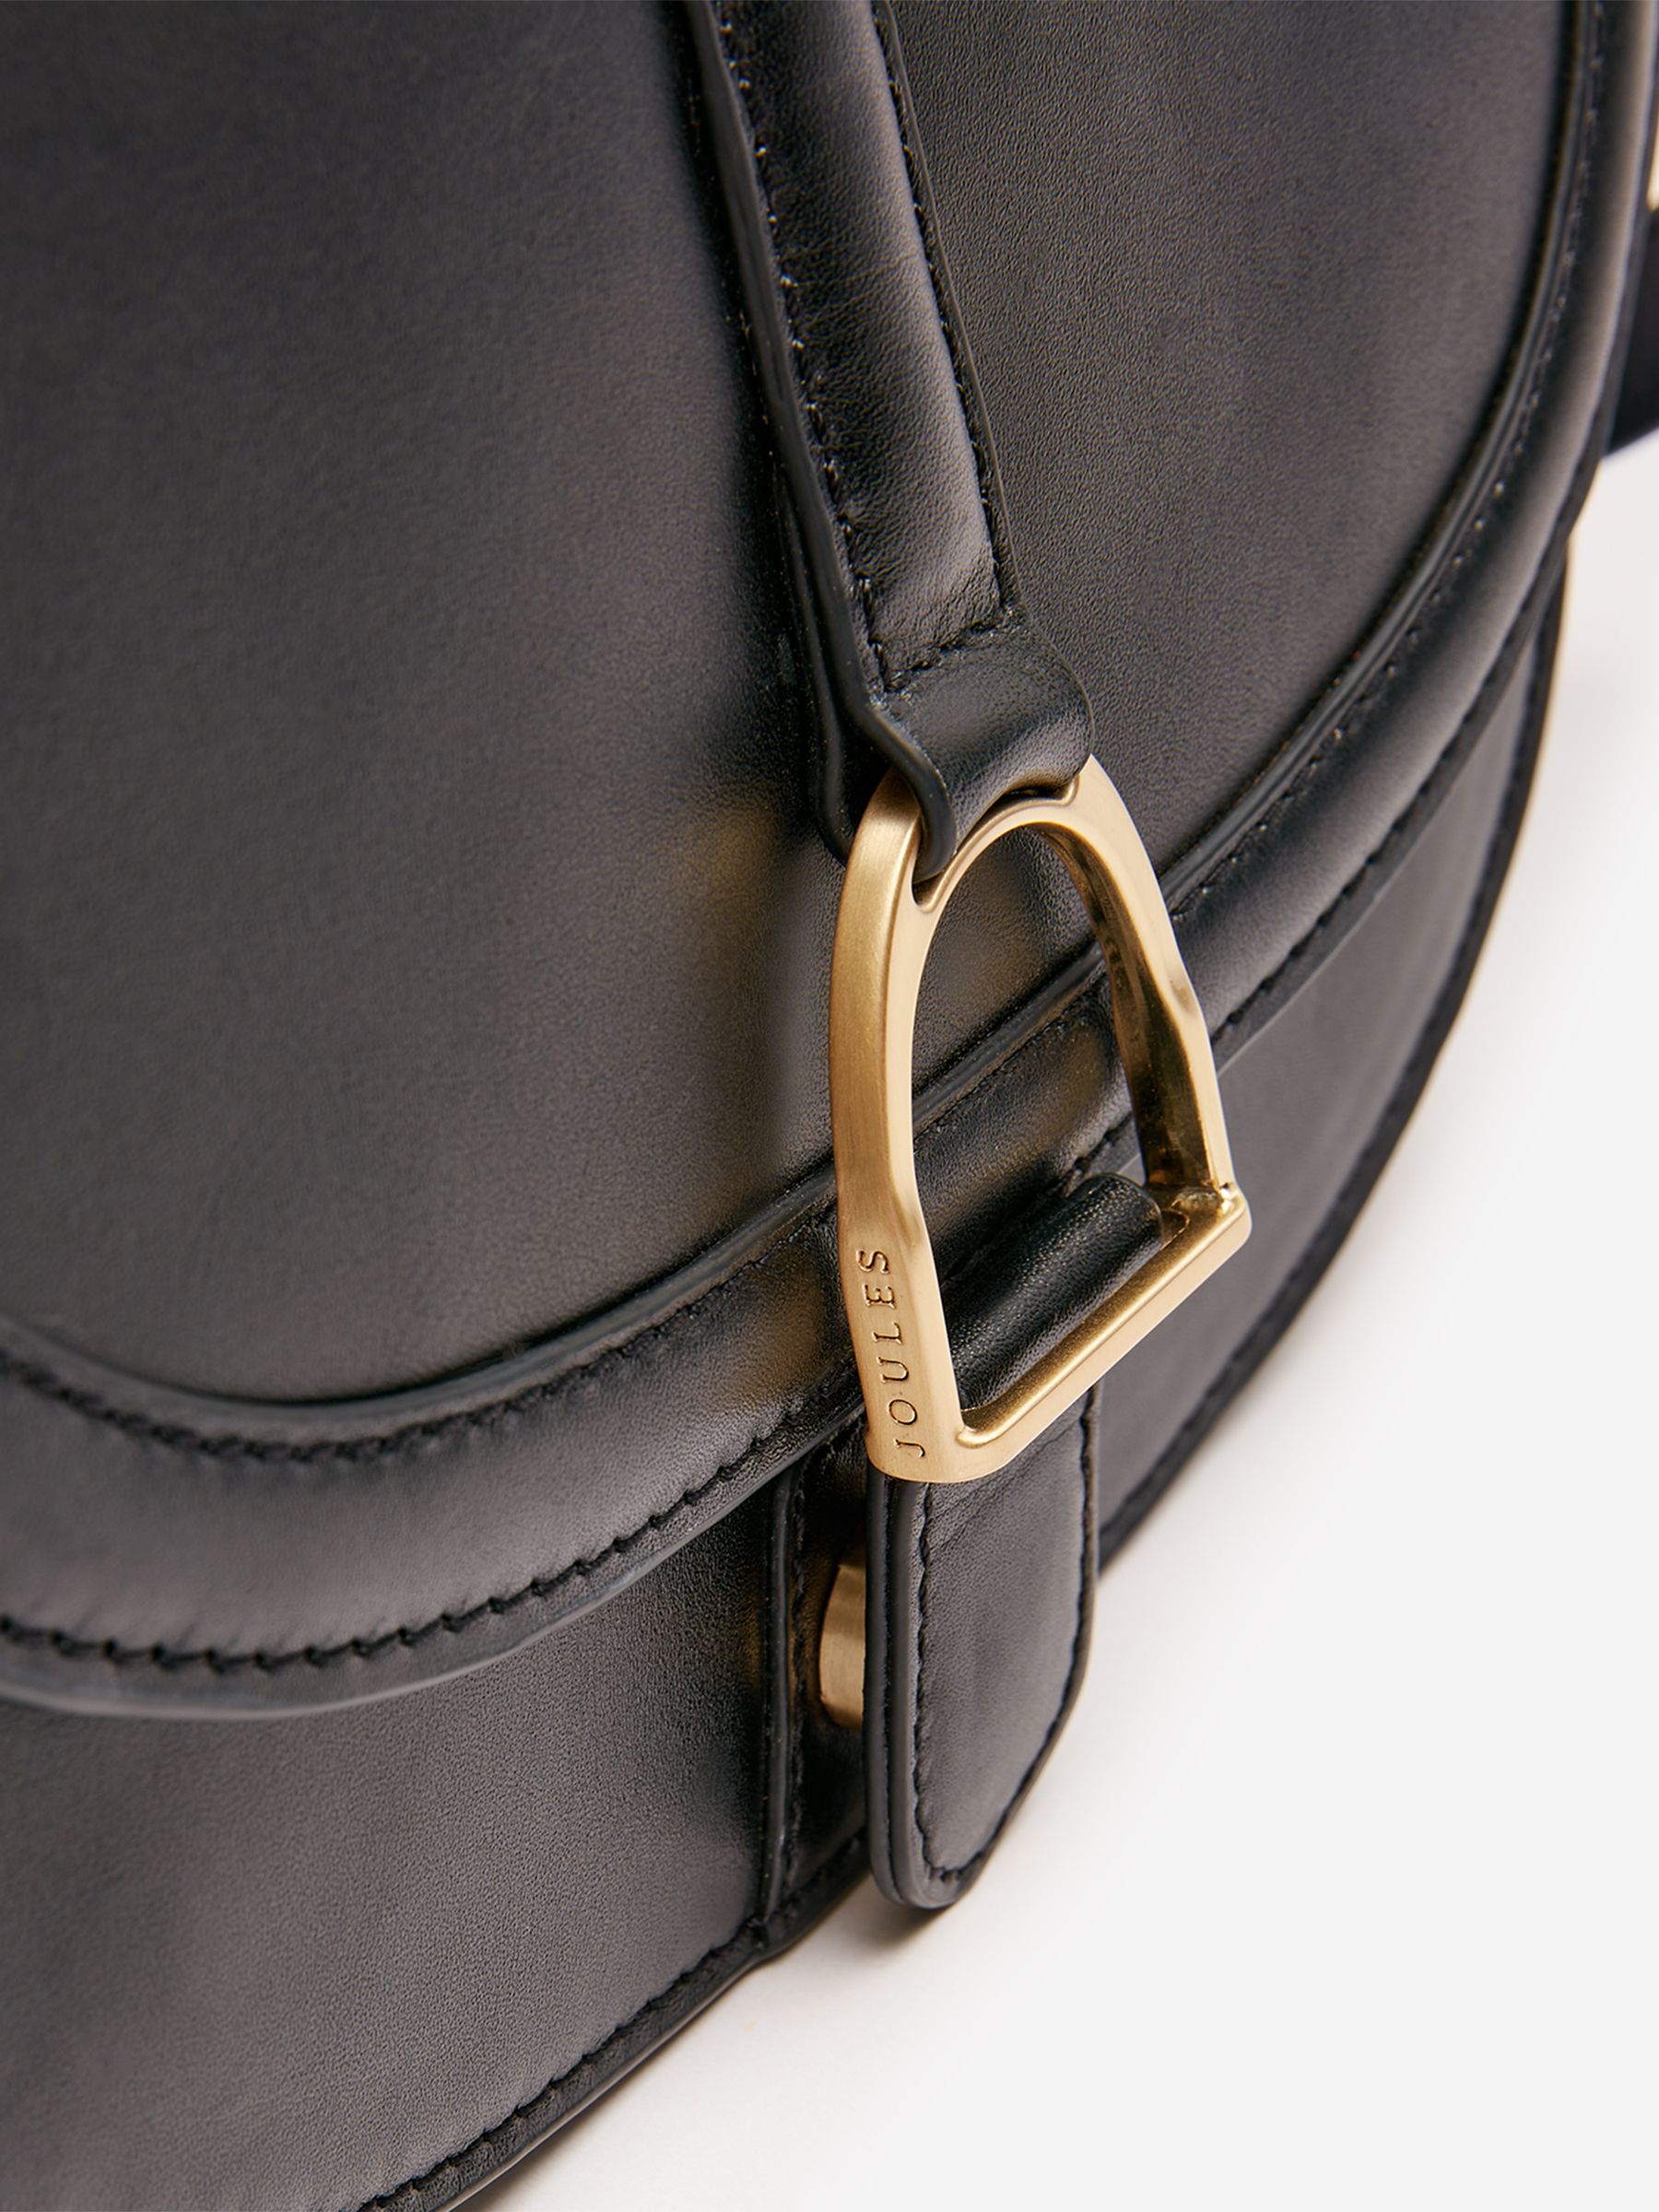 Buy Black Soft Leather Cross Body Bag from the Joules online shop